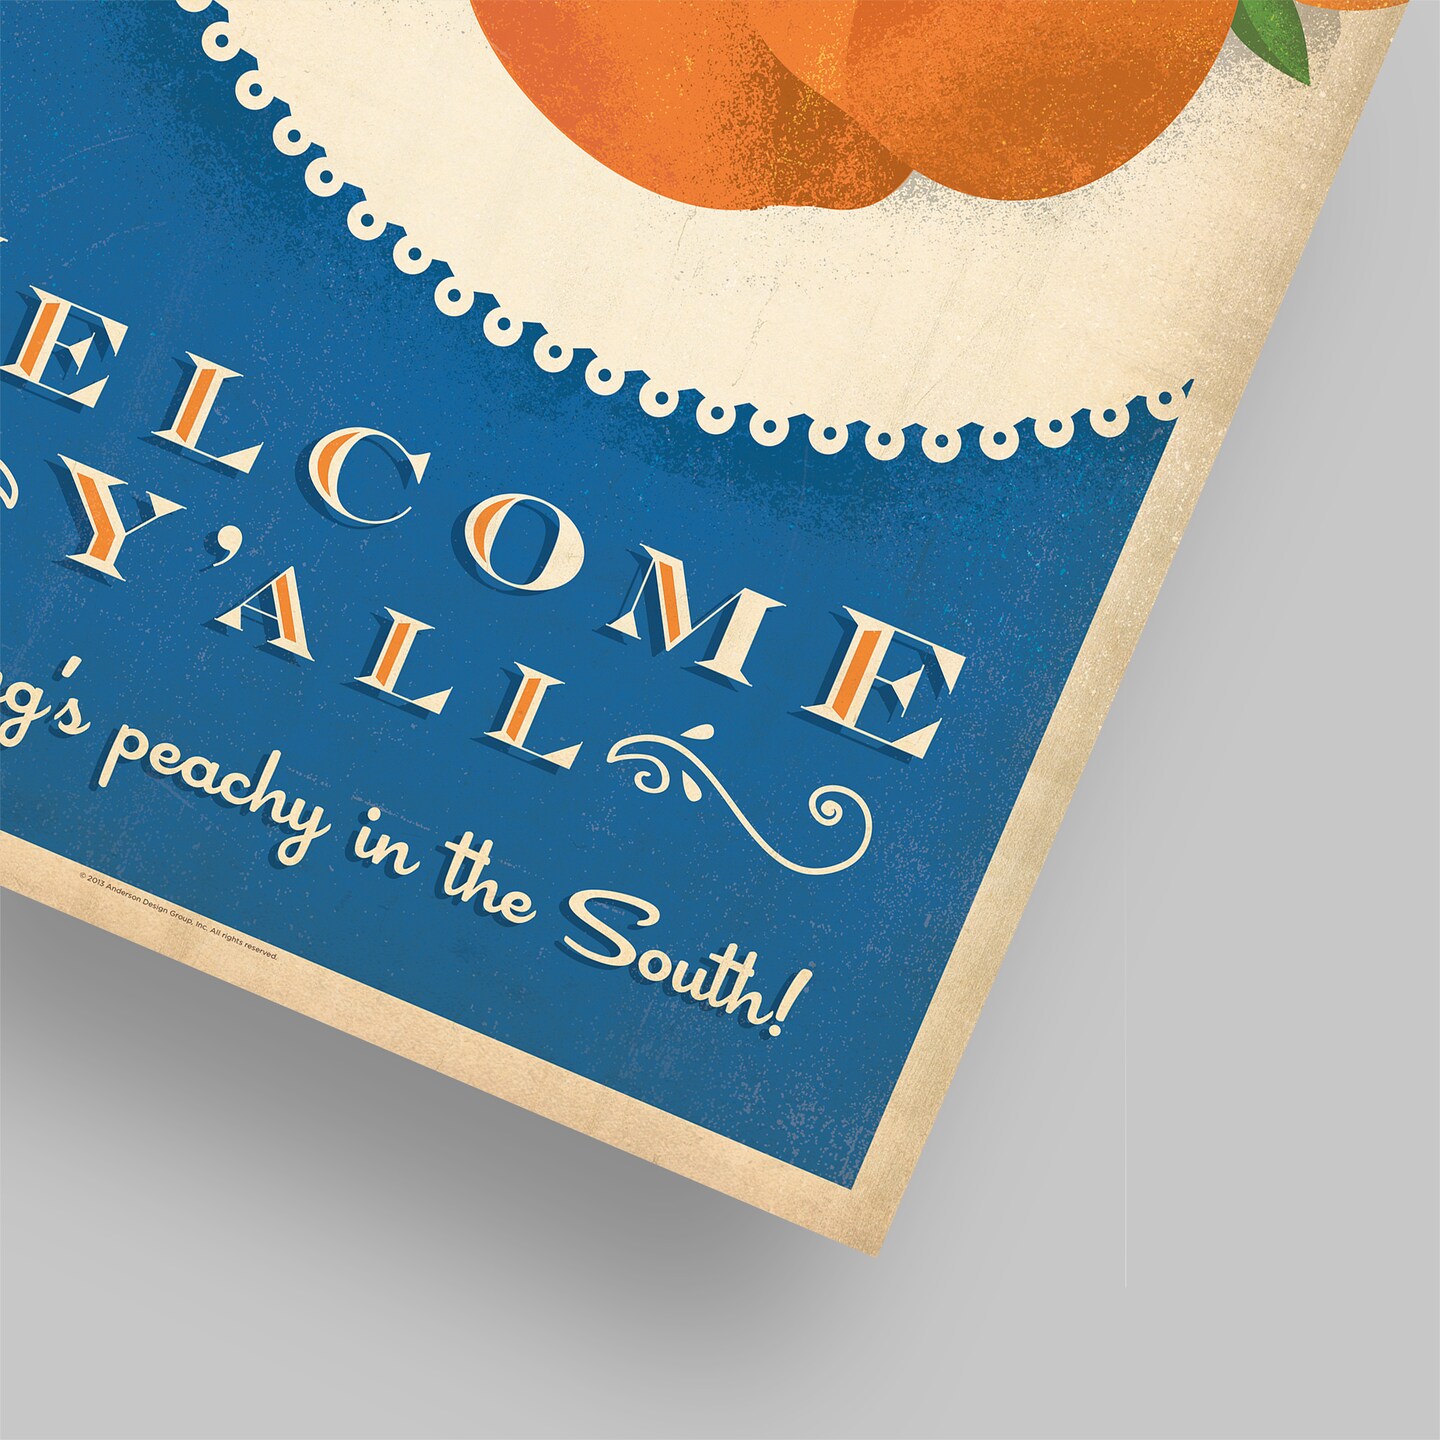 Welcome Yall Peaches by Anderson Design Group  Poster Art Print - Americanflat